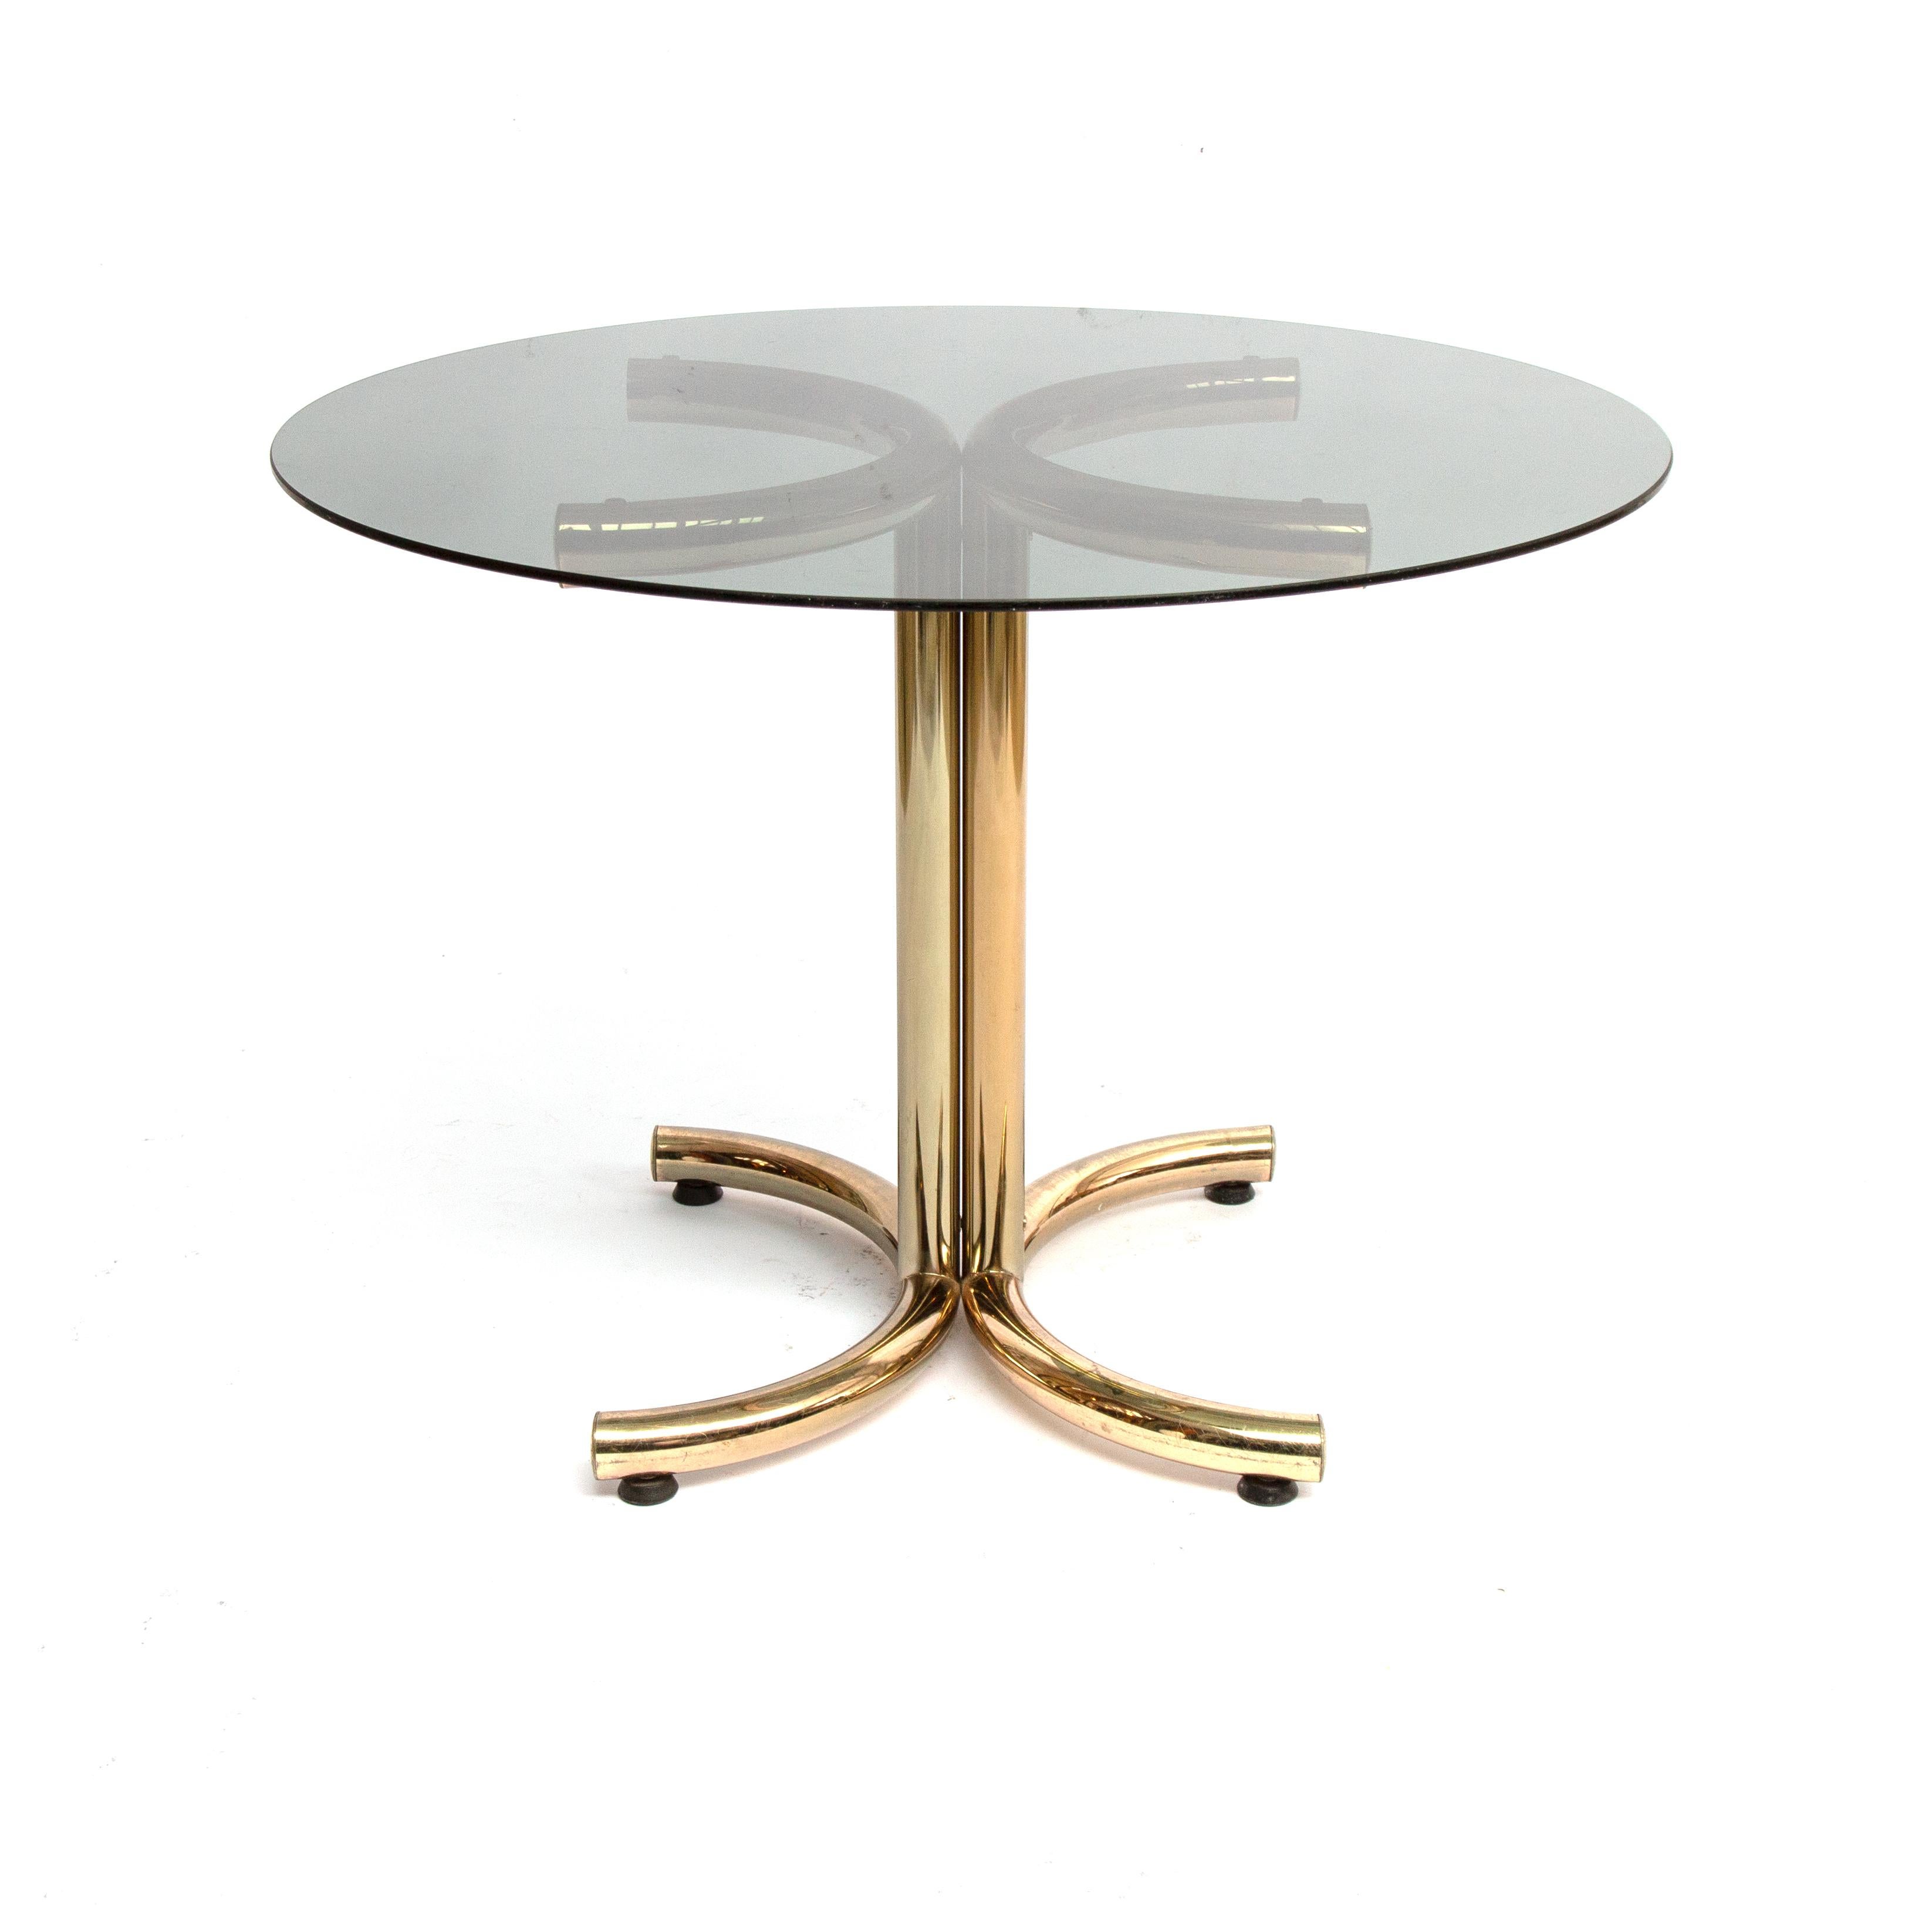 1970s brass plated chrome base and smoked glass round dining table by Giotto Stoppino. Midcentury brass and smoked glass round table 120cm diameter by Giotto Stoppino 1970s. In good used vintage condition. On one end of the frame a rod end misses.